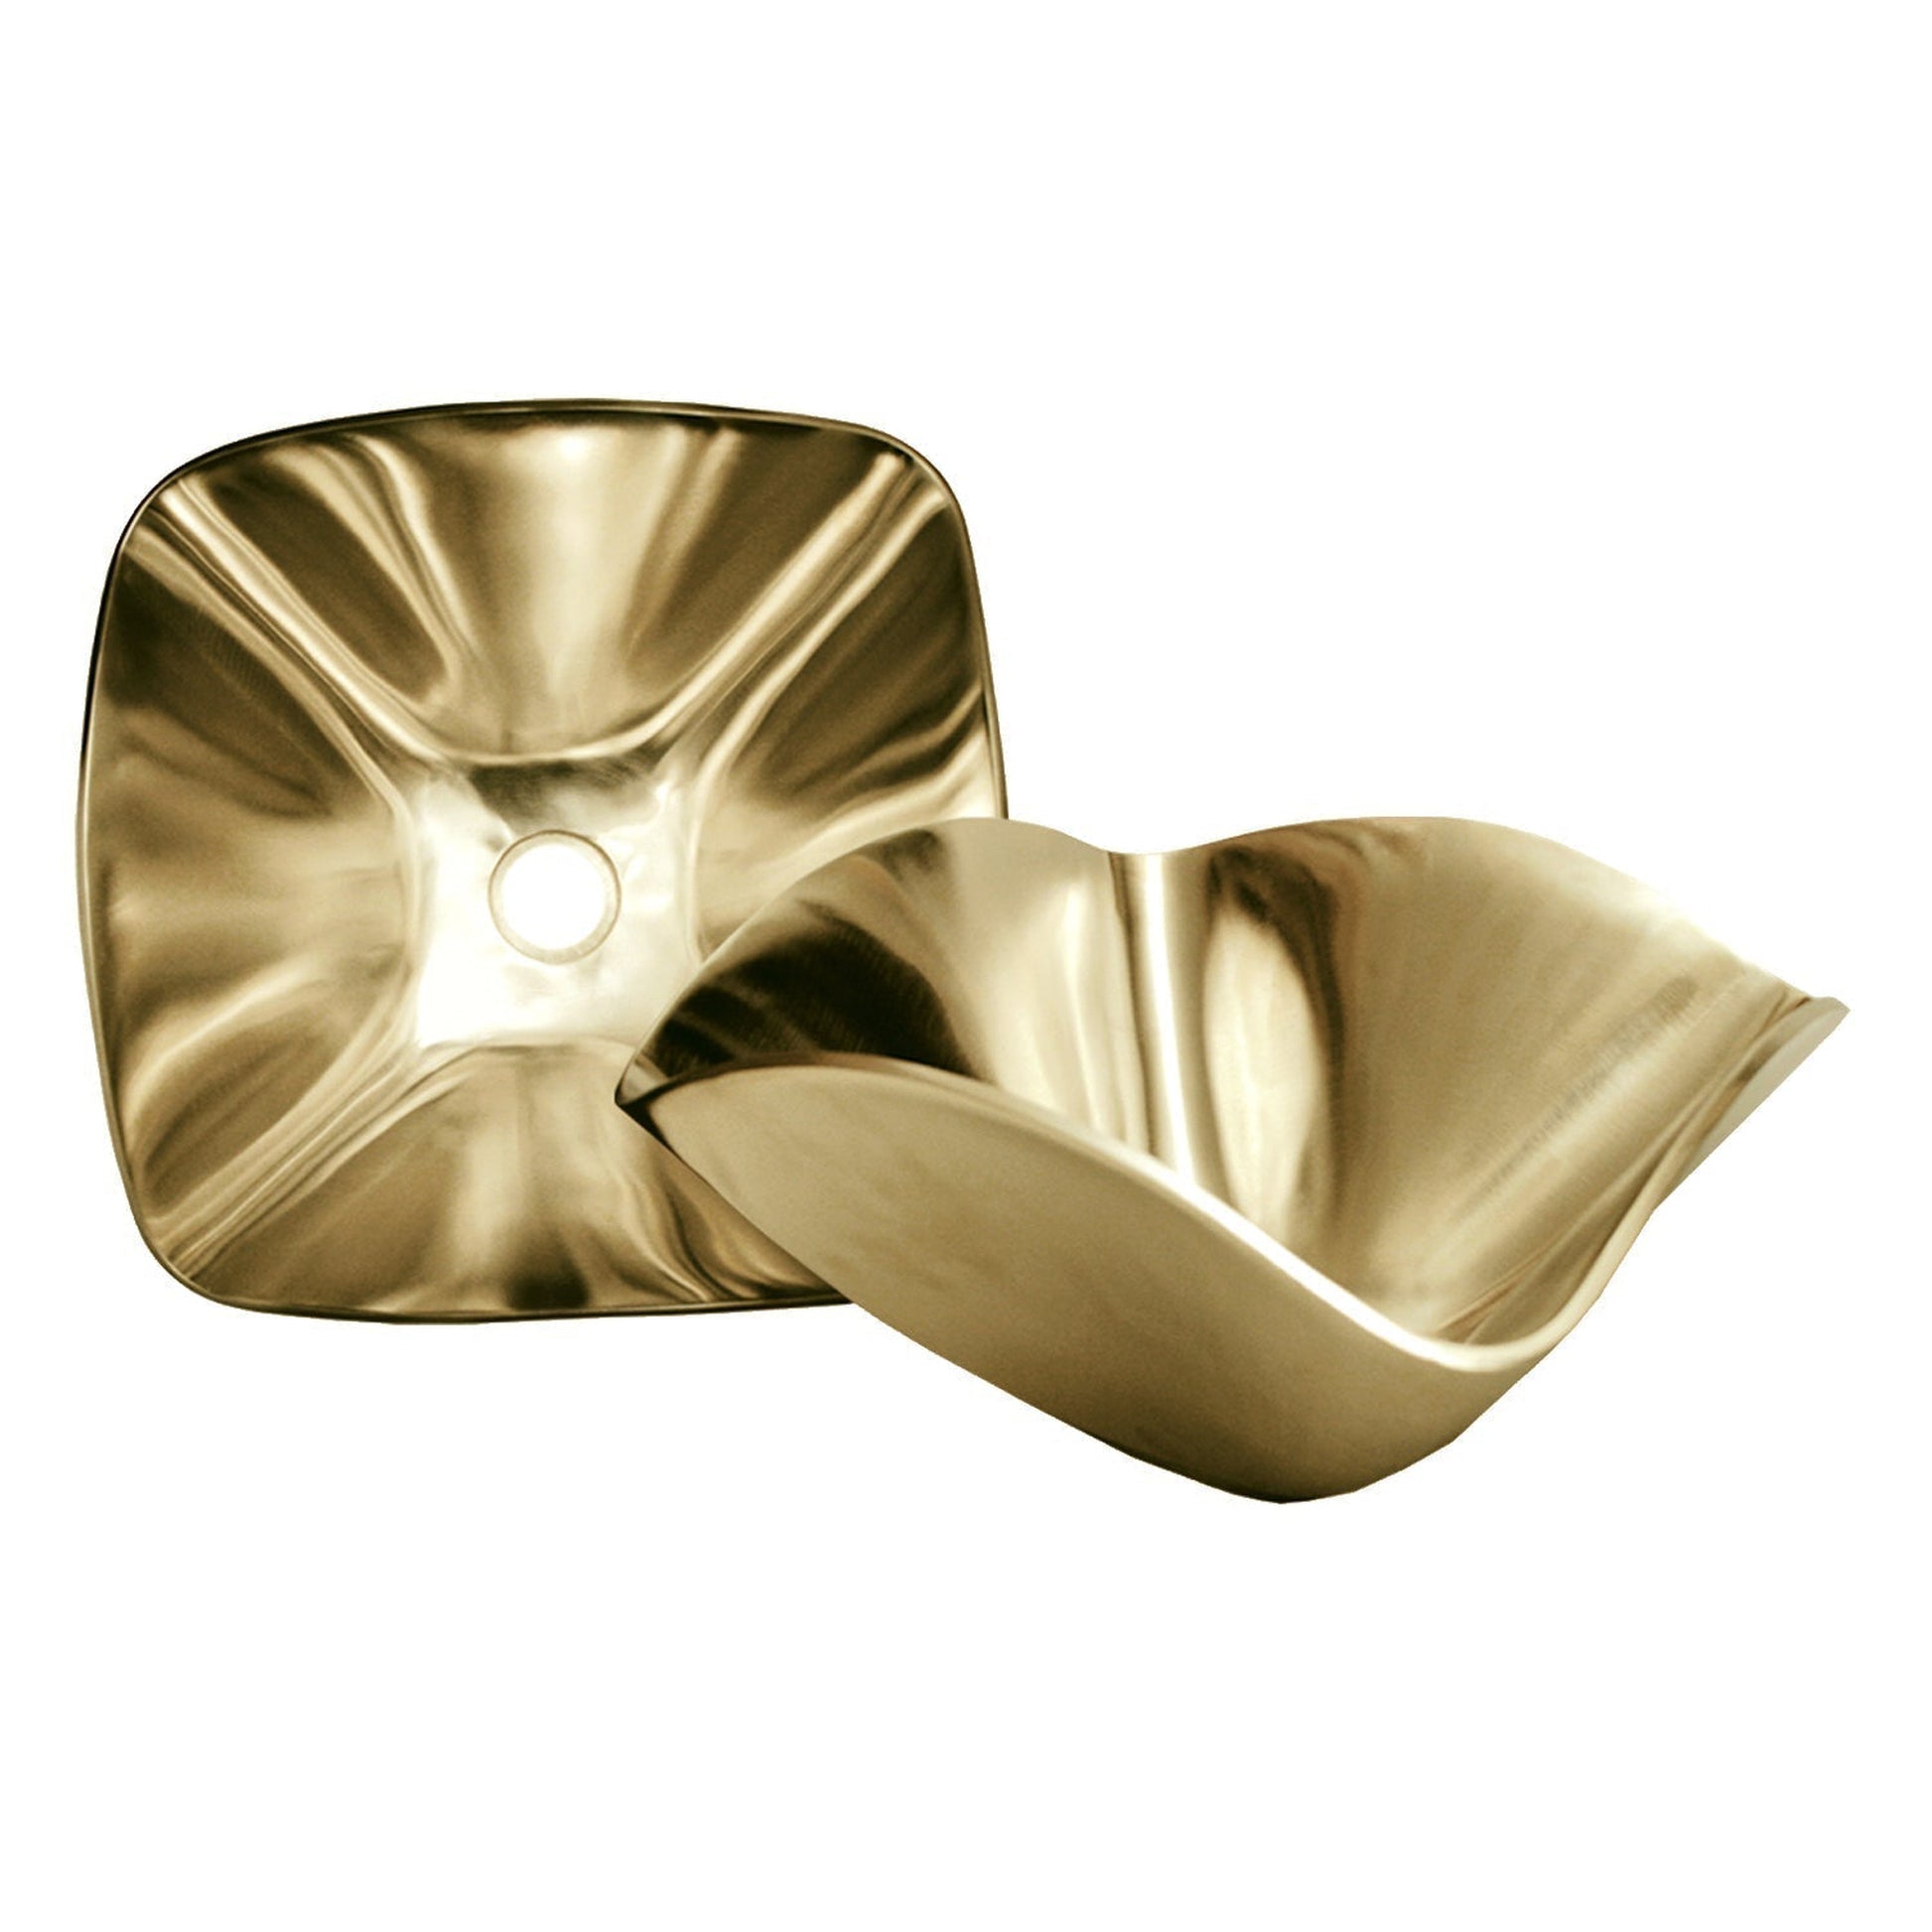 Whitehaus Copperhaus WHB13TLDV-B Polished Brass Rectangular Above Mount Basin With Smooth Texture & 1 1/2" Center Drain